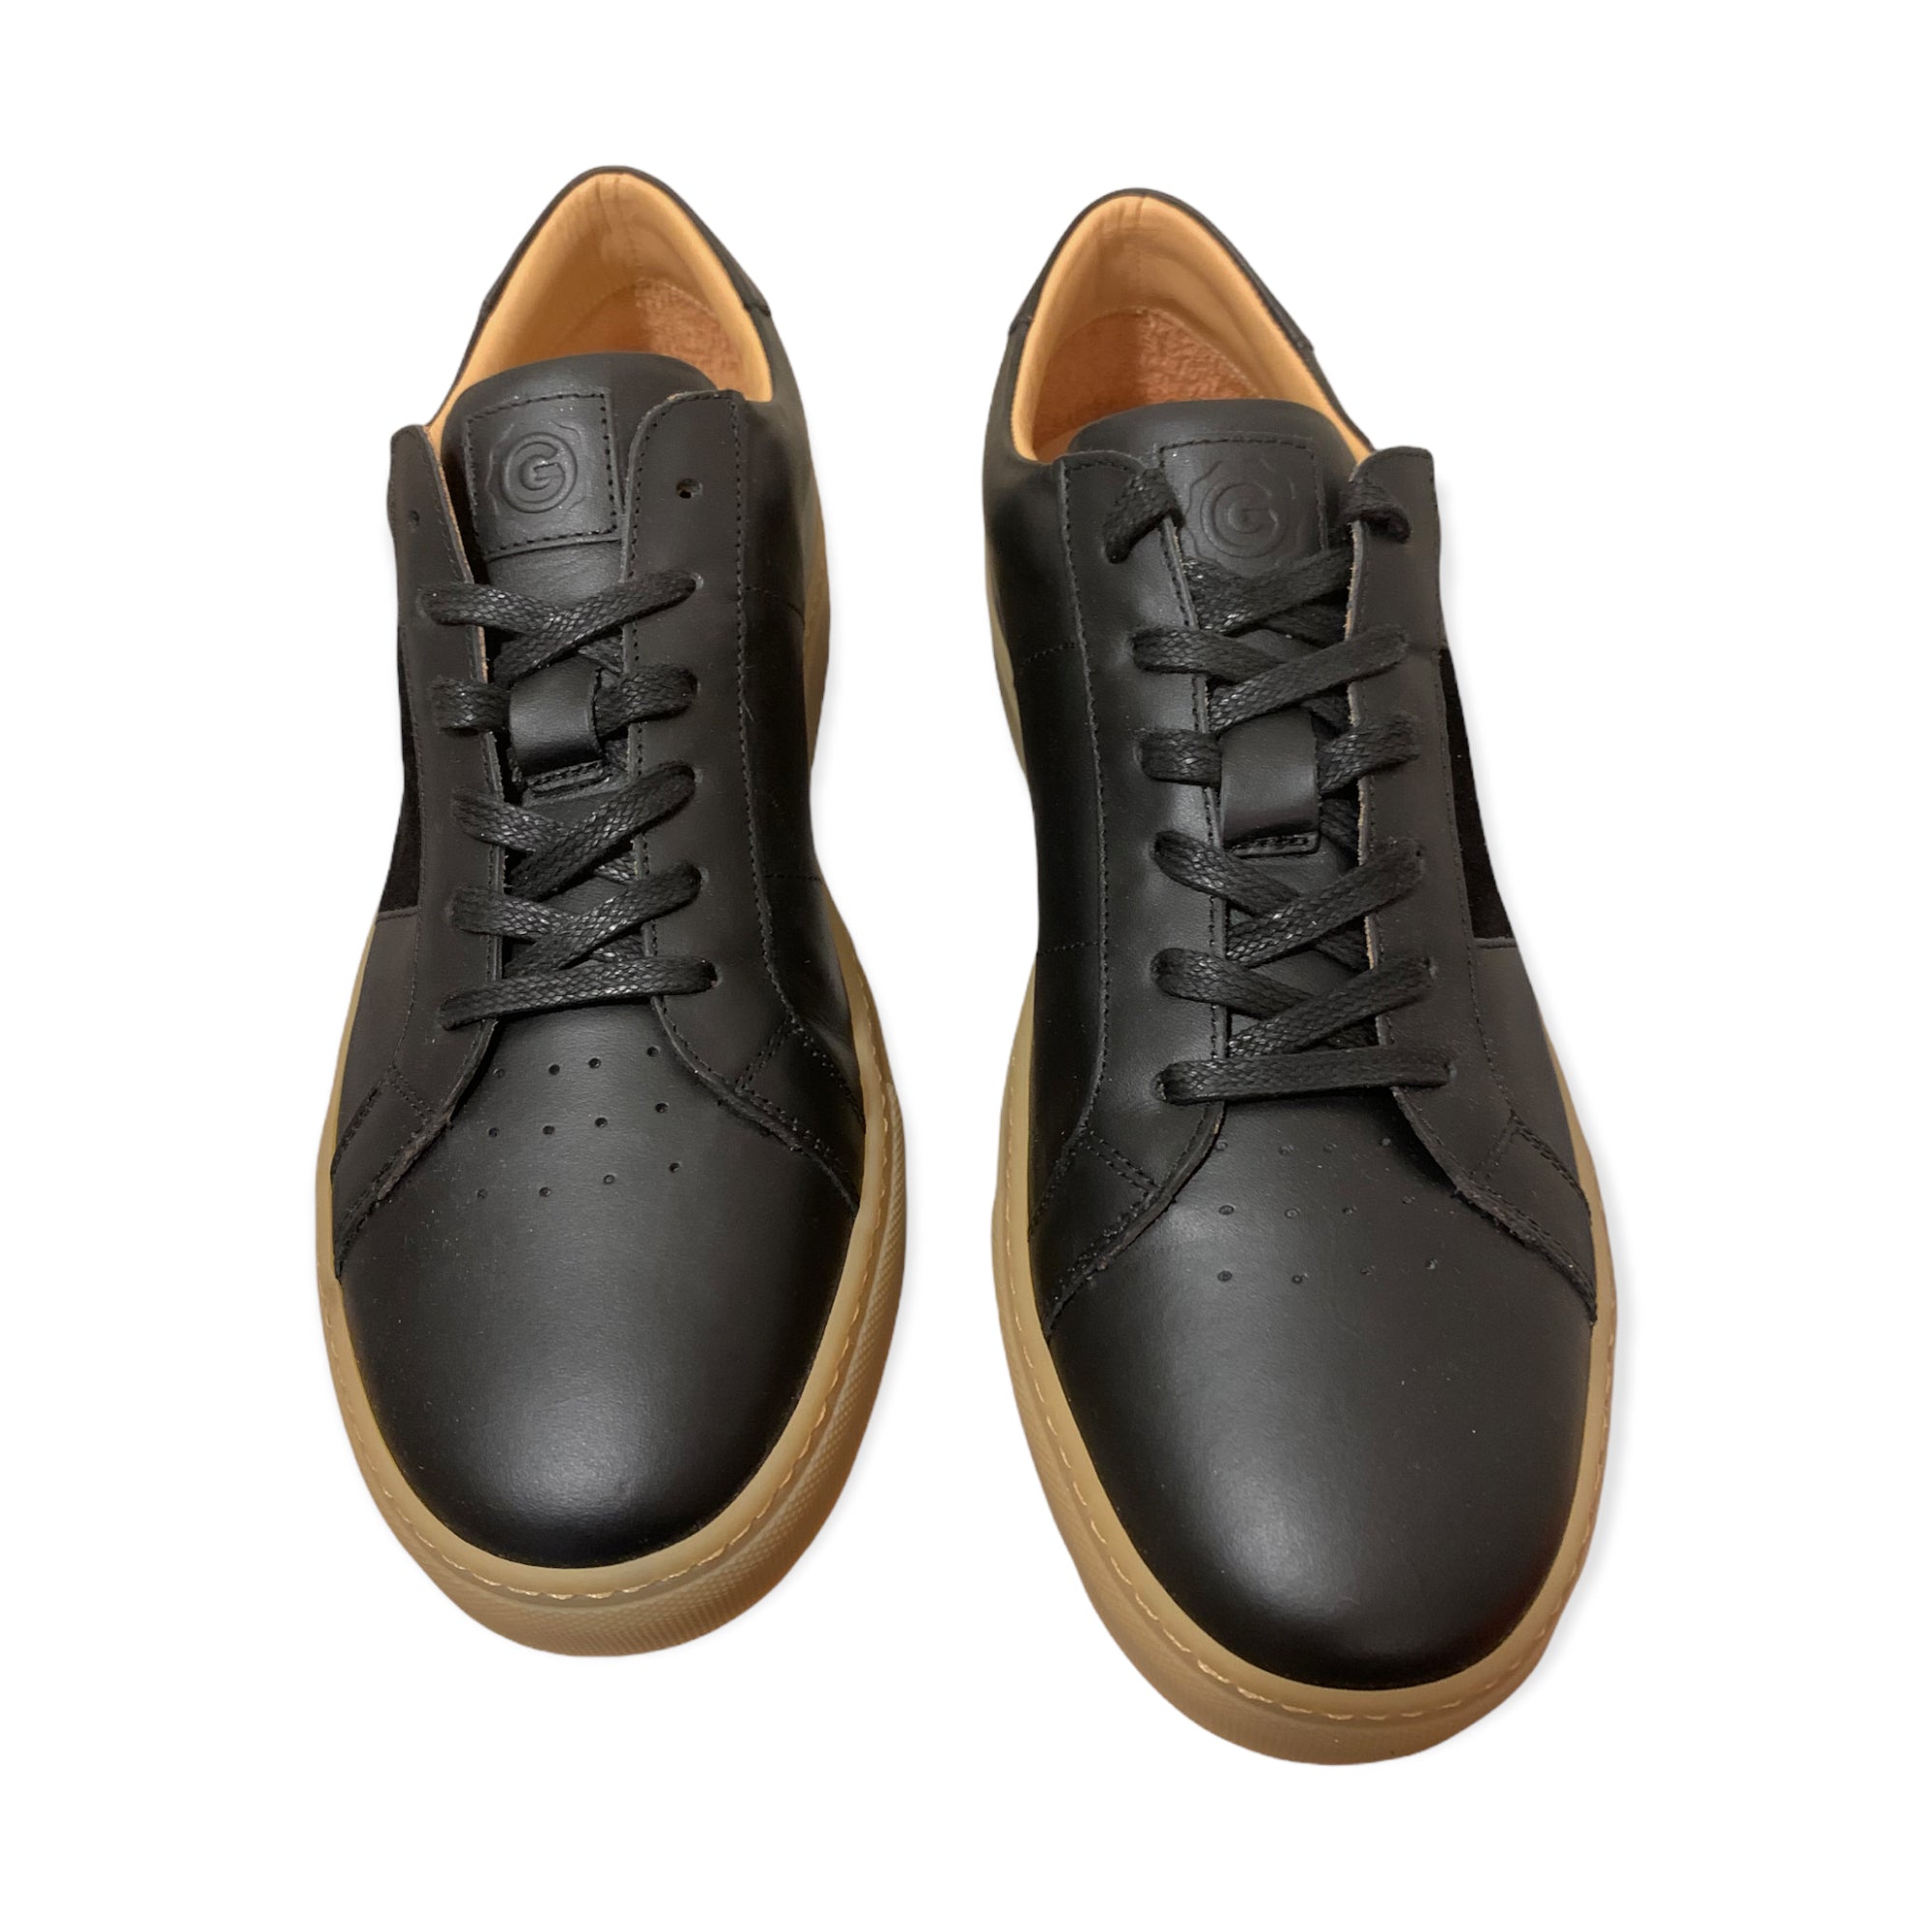 GREATS Brooklyn Made in Italy |Men’s Size: US 10|